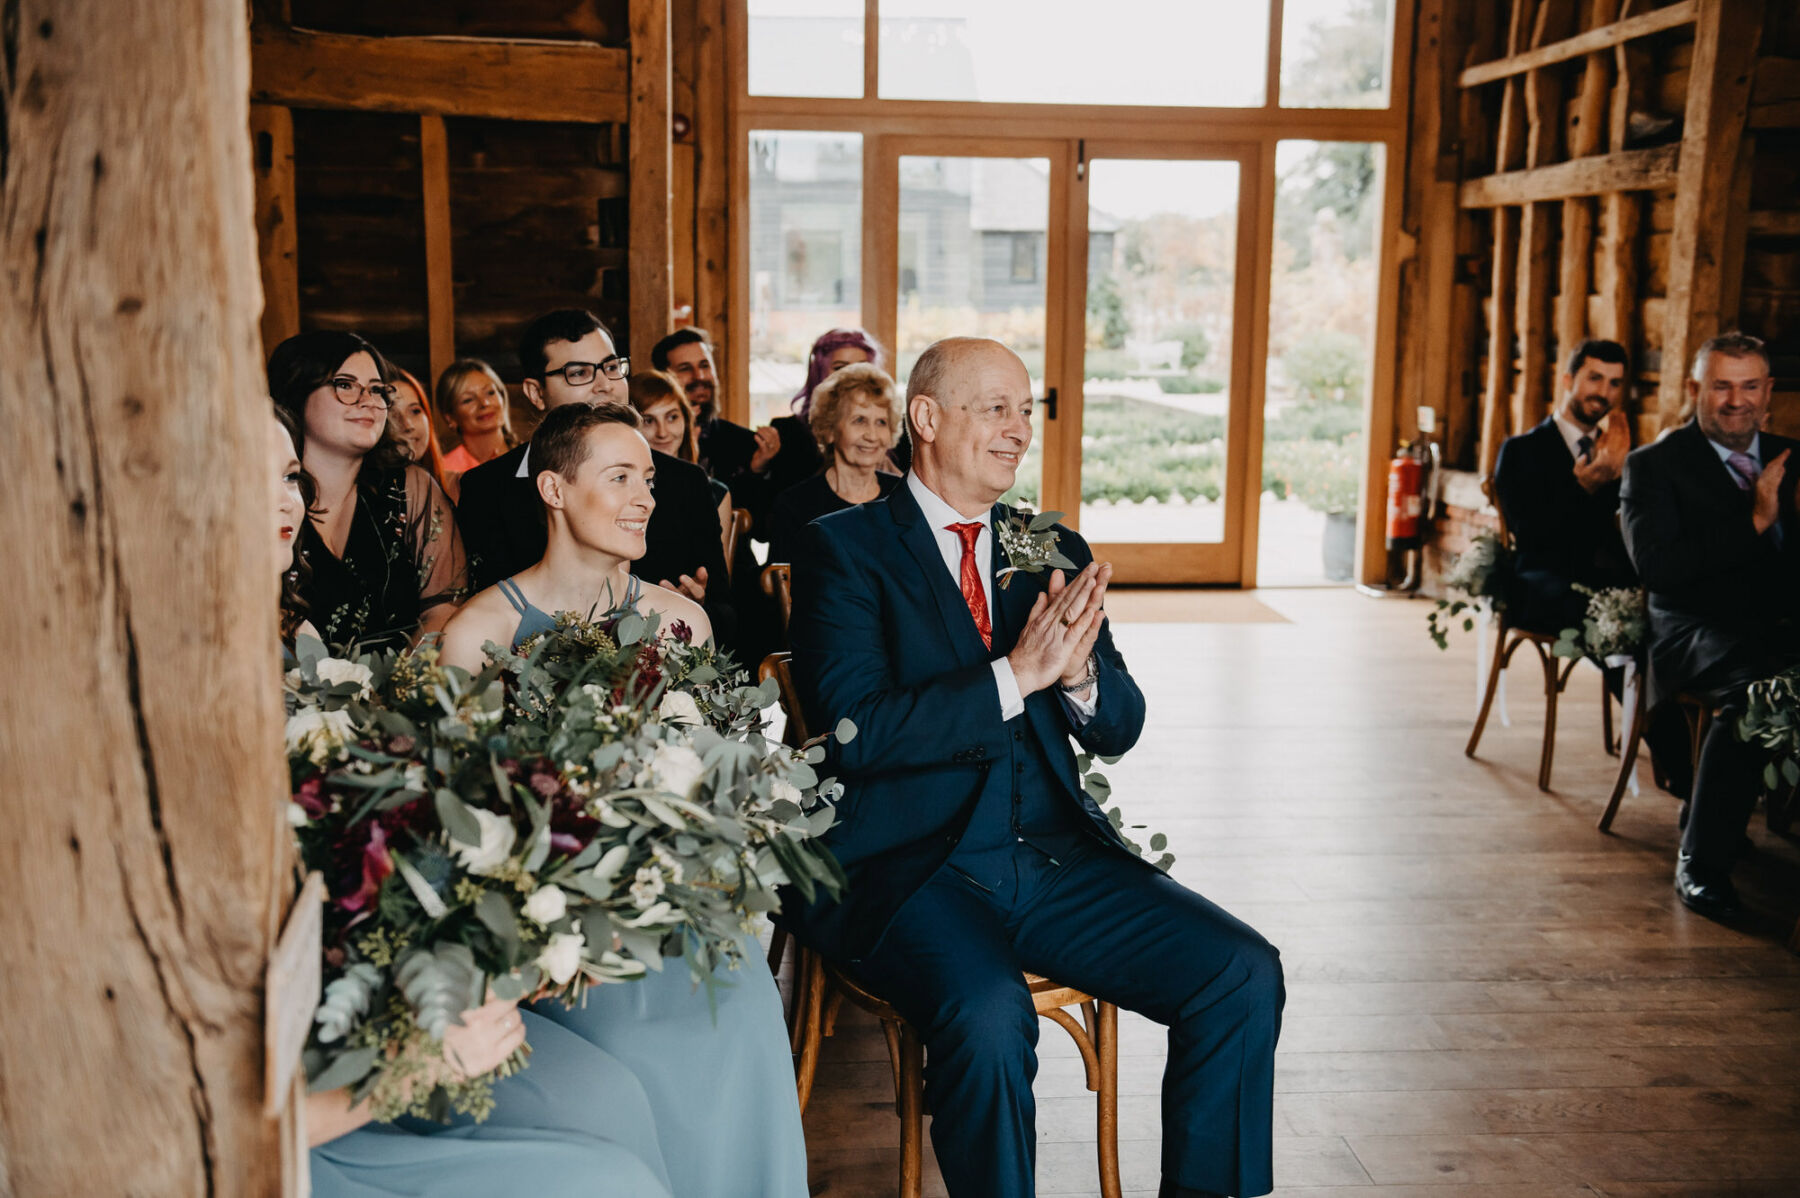 Happy father of the bride sitting during wedding ceremony. Jessica Grace Photography.